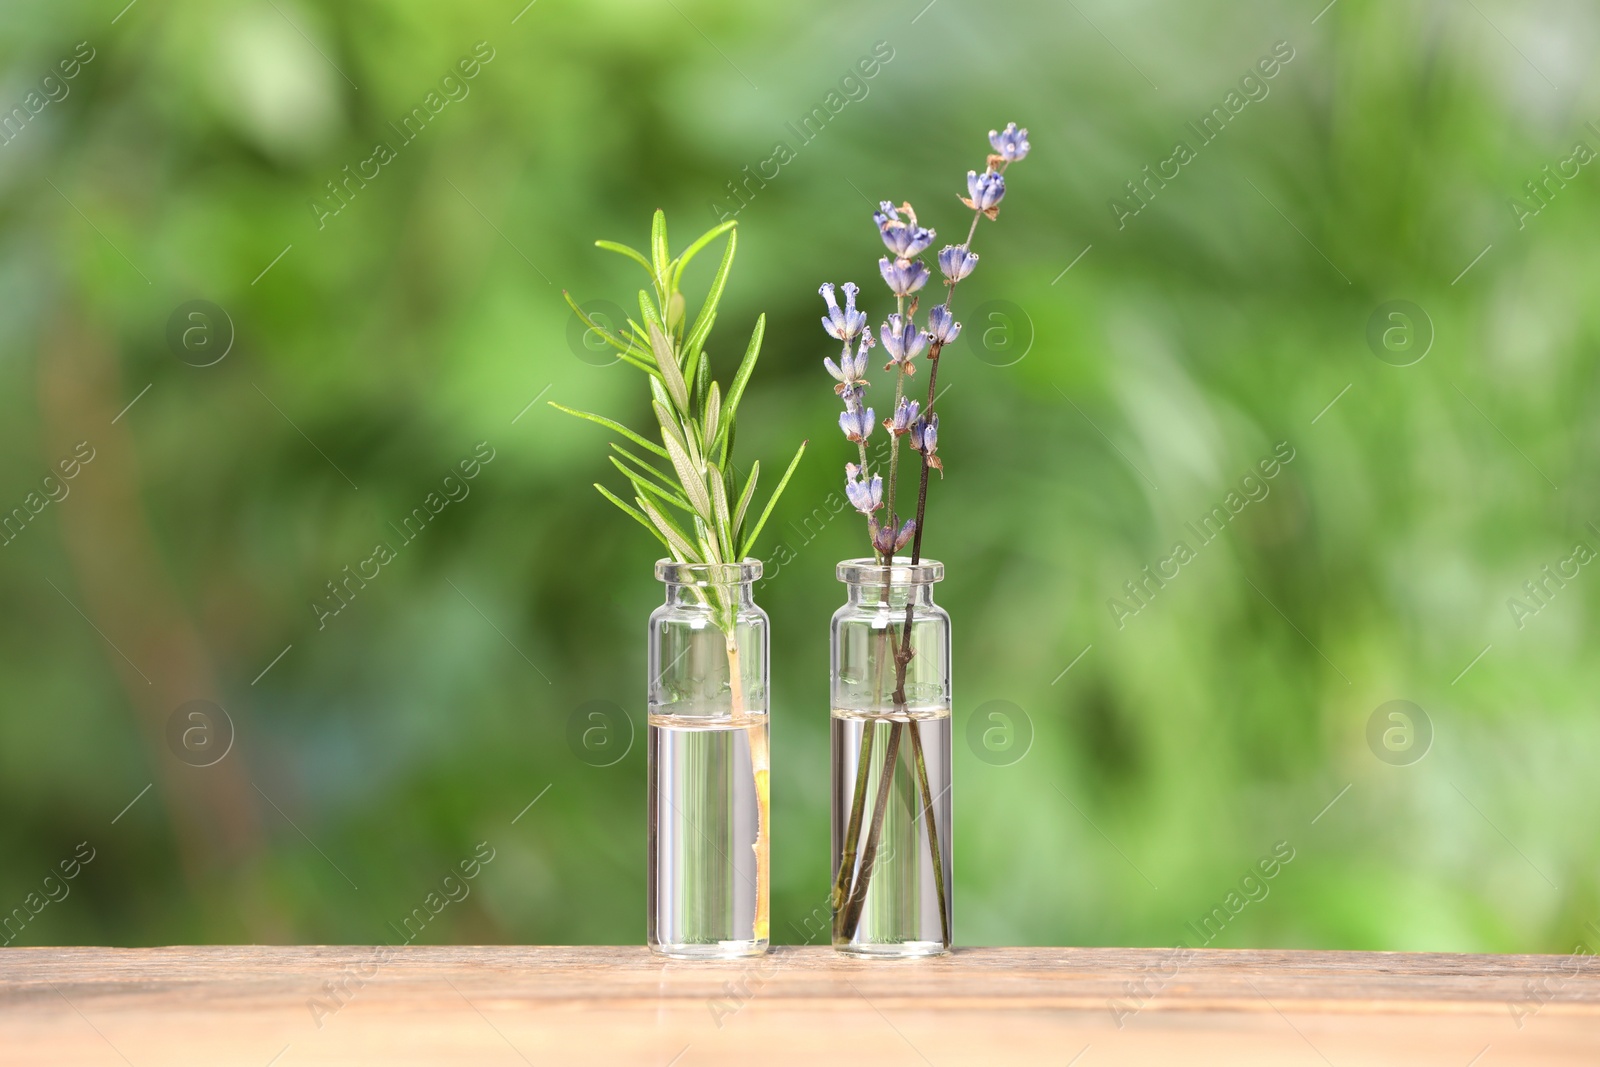 Photo of Bottles with essential oils, rosemary and lavender on wooden table against blurred green background